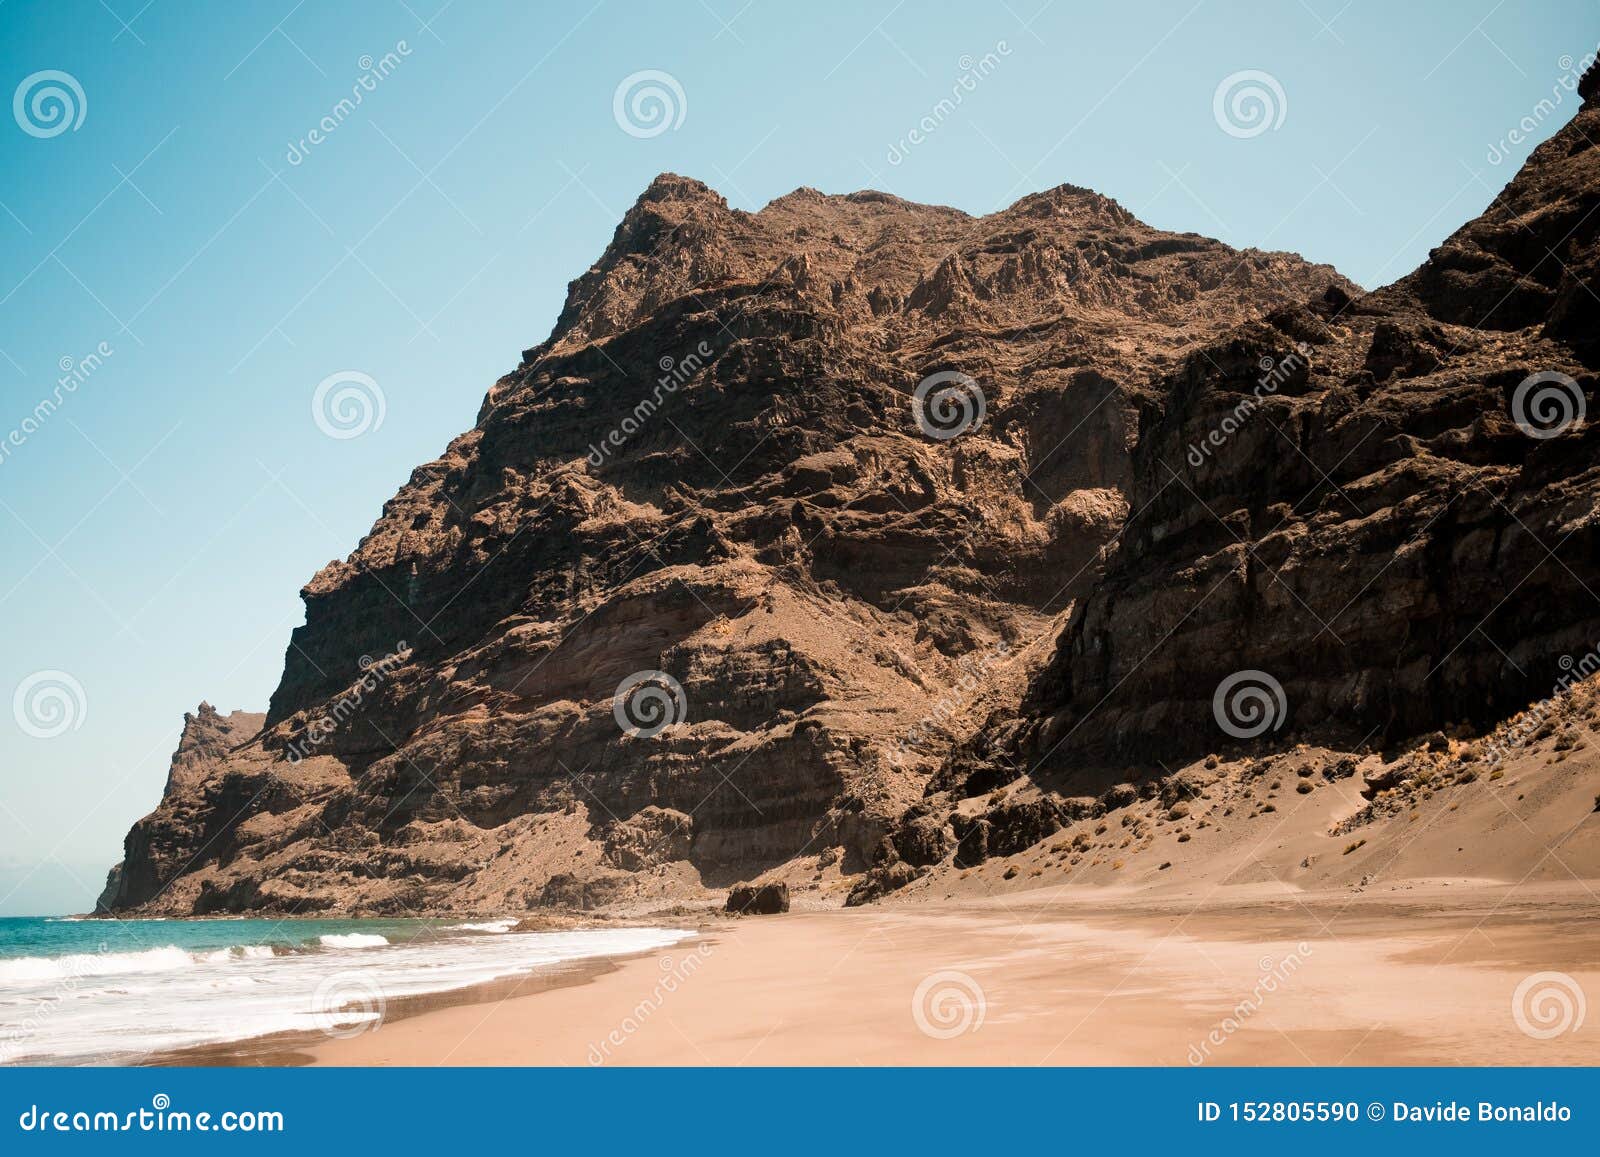 scenic view of gui gui beach in gran canaria island in spain with spectacular mountains landscape and clear blue sky and sandy